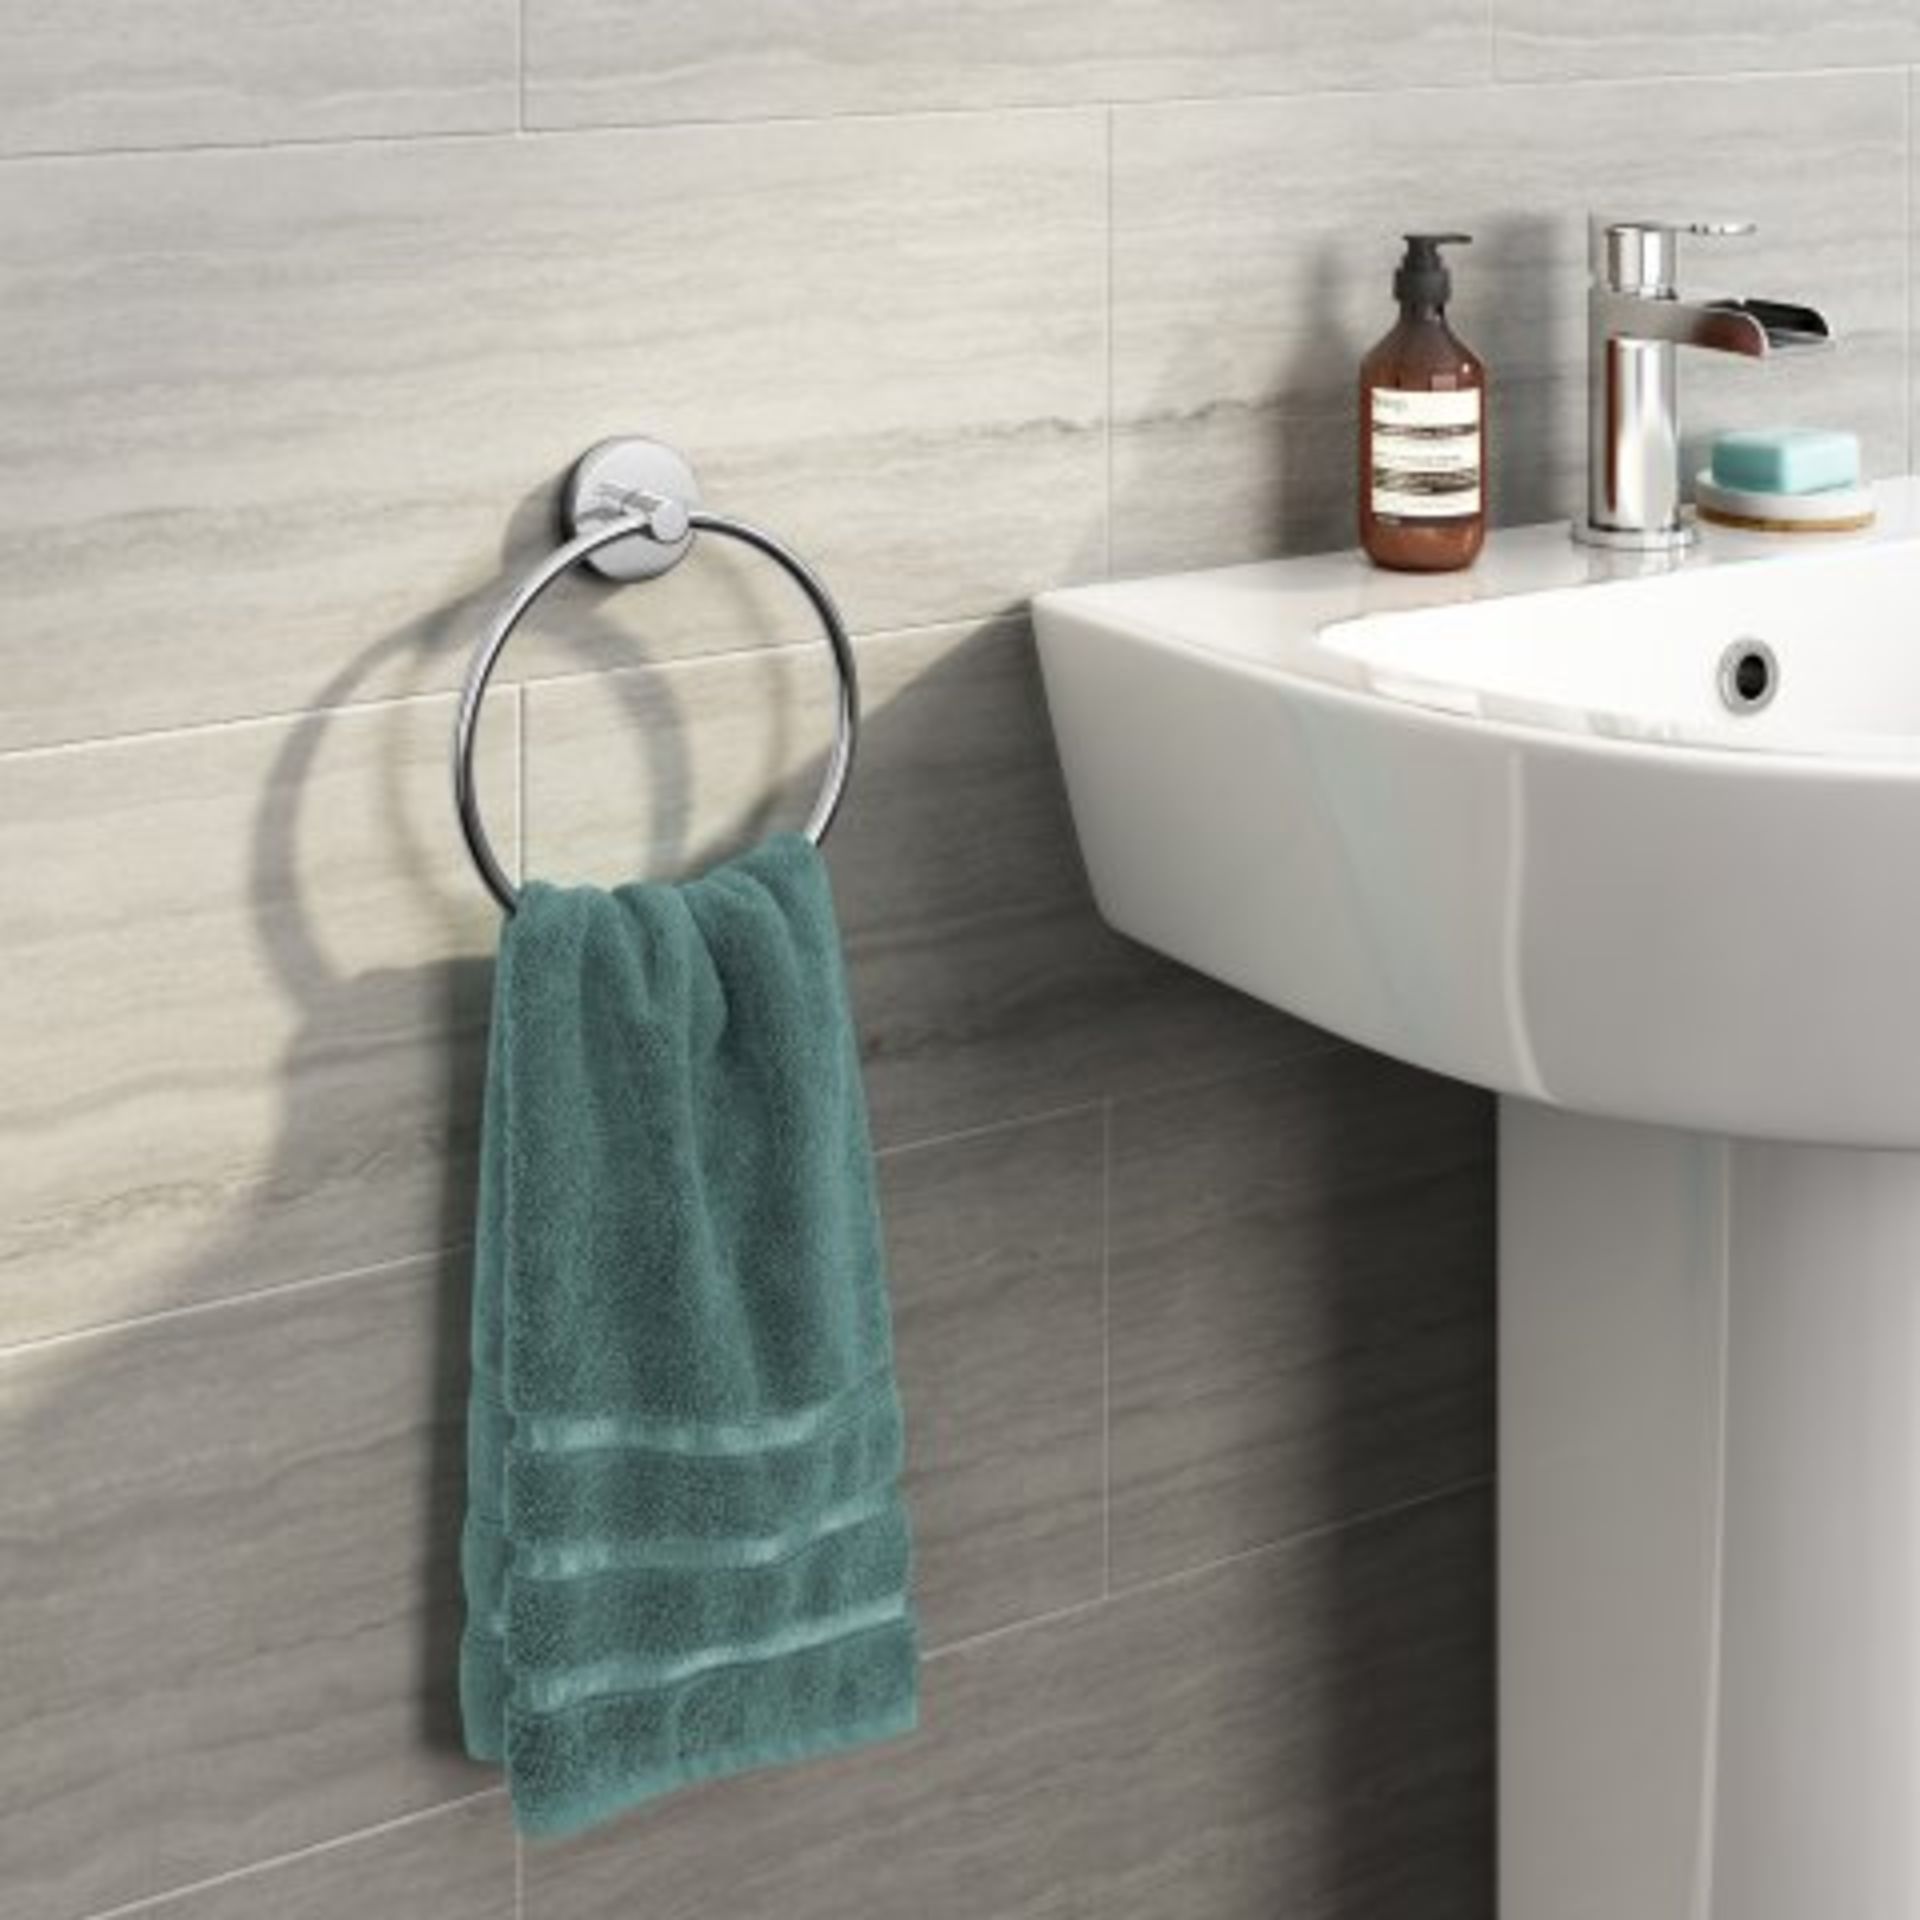 (K93) Finsbury Towel Ring Paying attention to detail can massively uplift your bathroom decor. Our